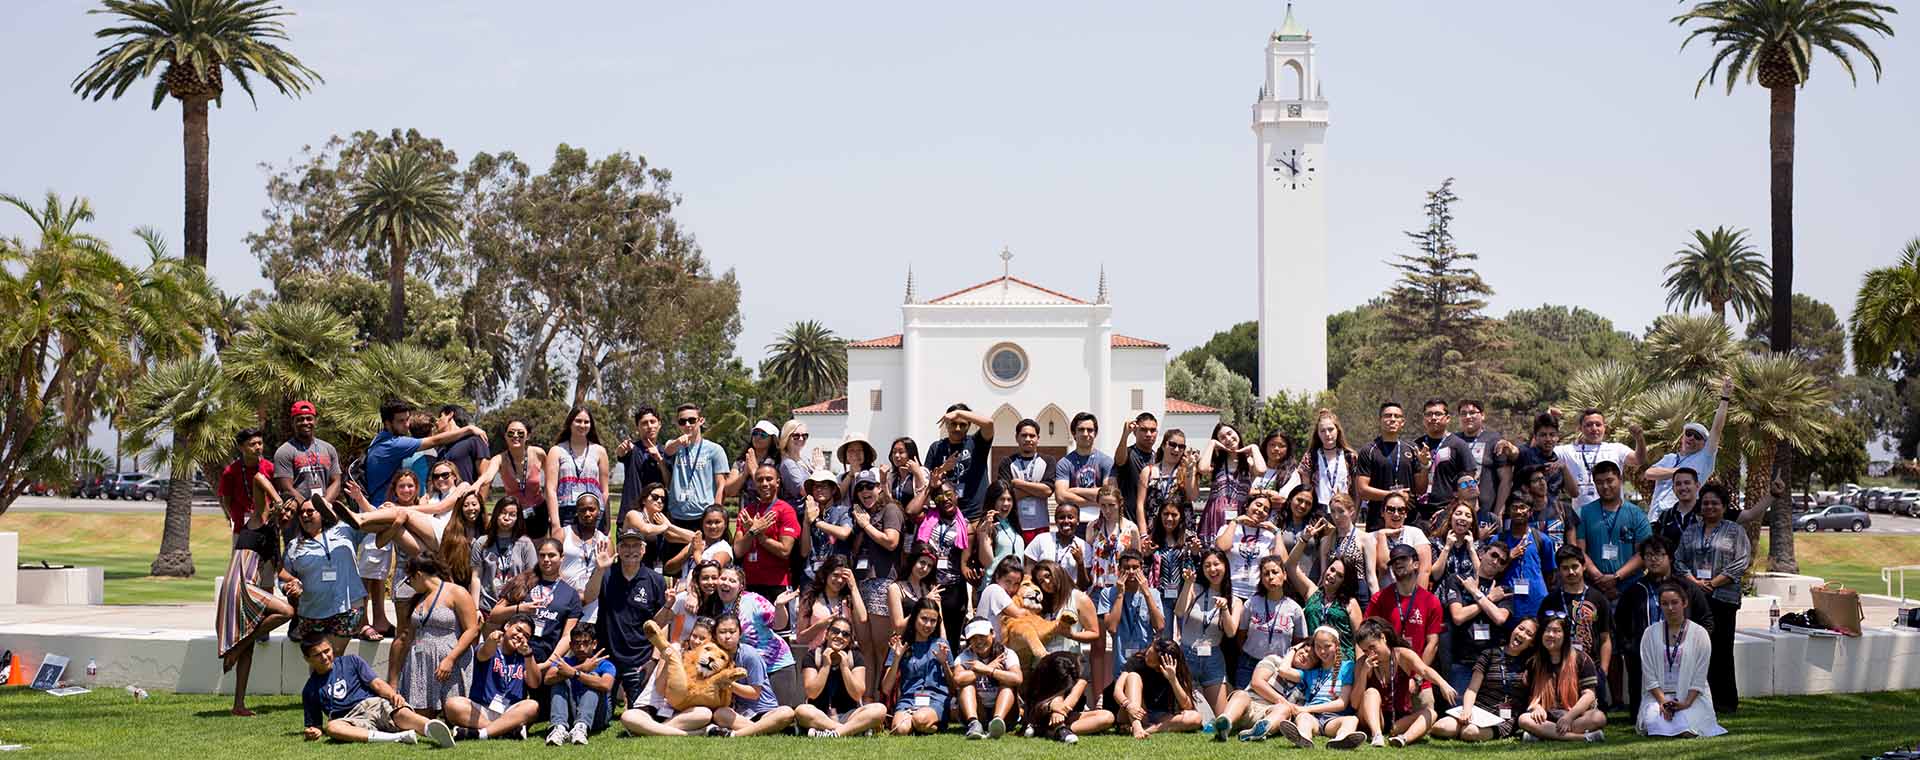 Group Shot of Kids in Youth Theology Institute in Sunken Gardens